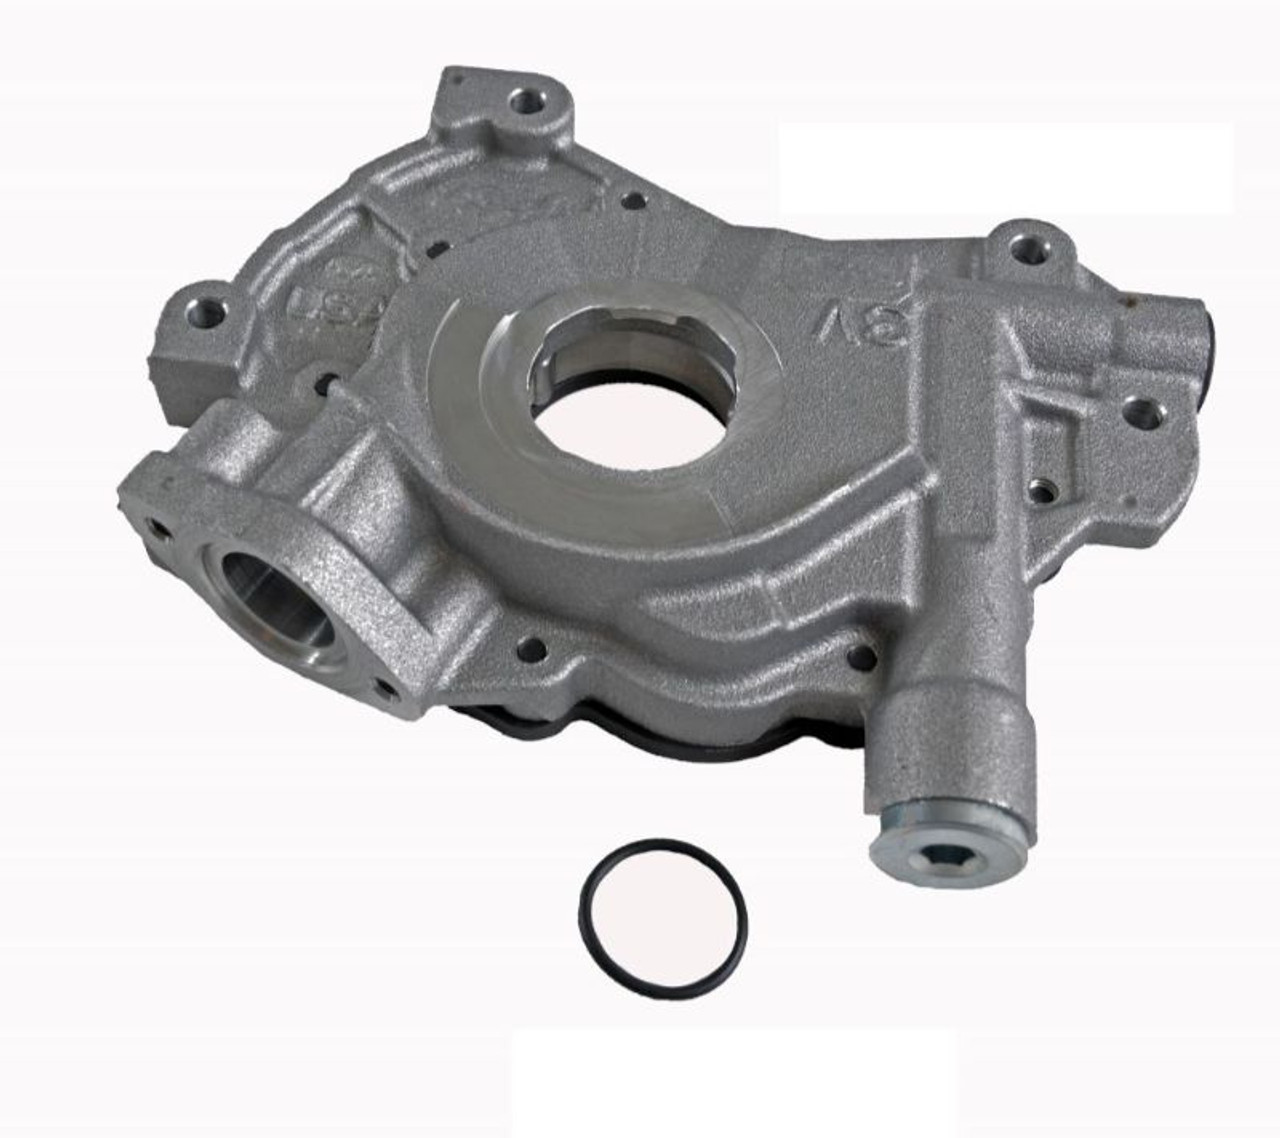 Oil Pump - 2011 Ford Expedition 5.4L (EP340.G61)